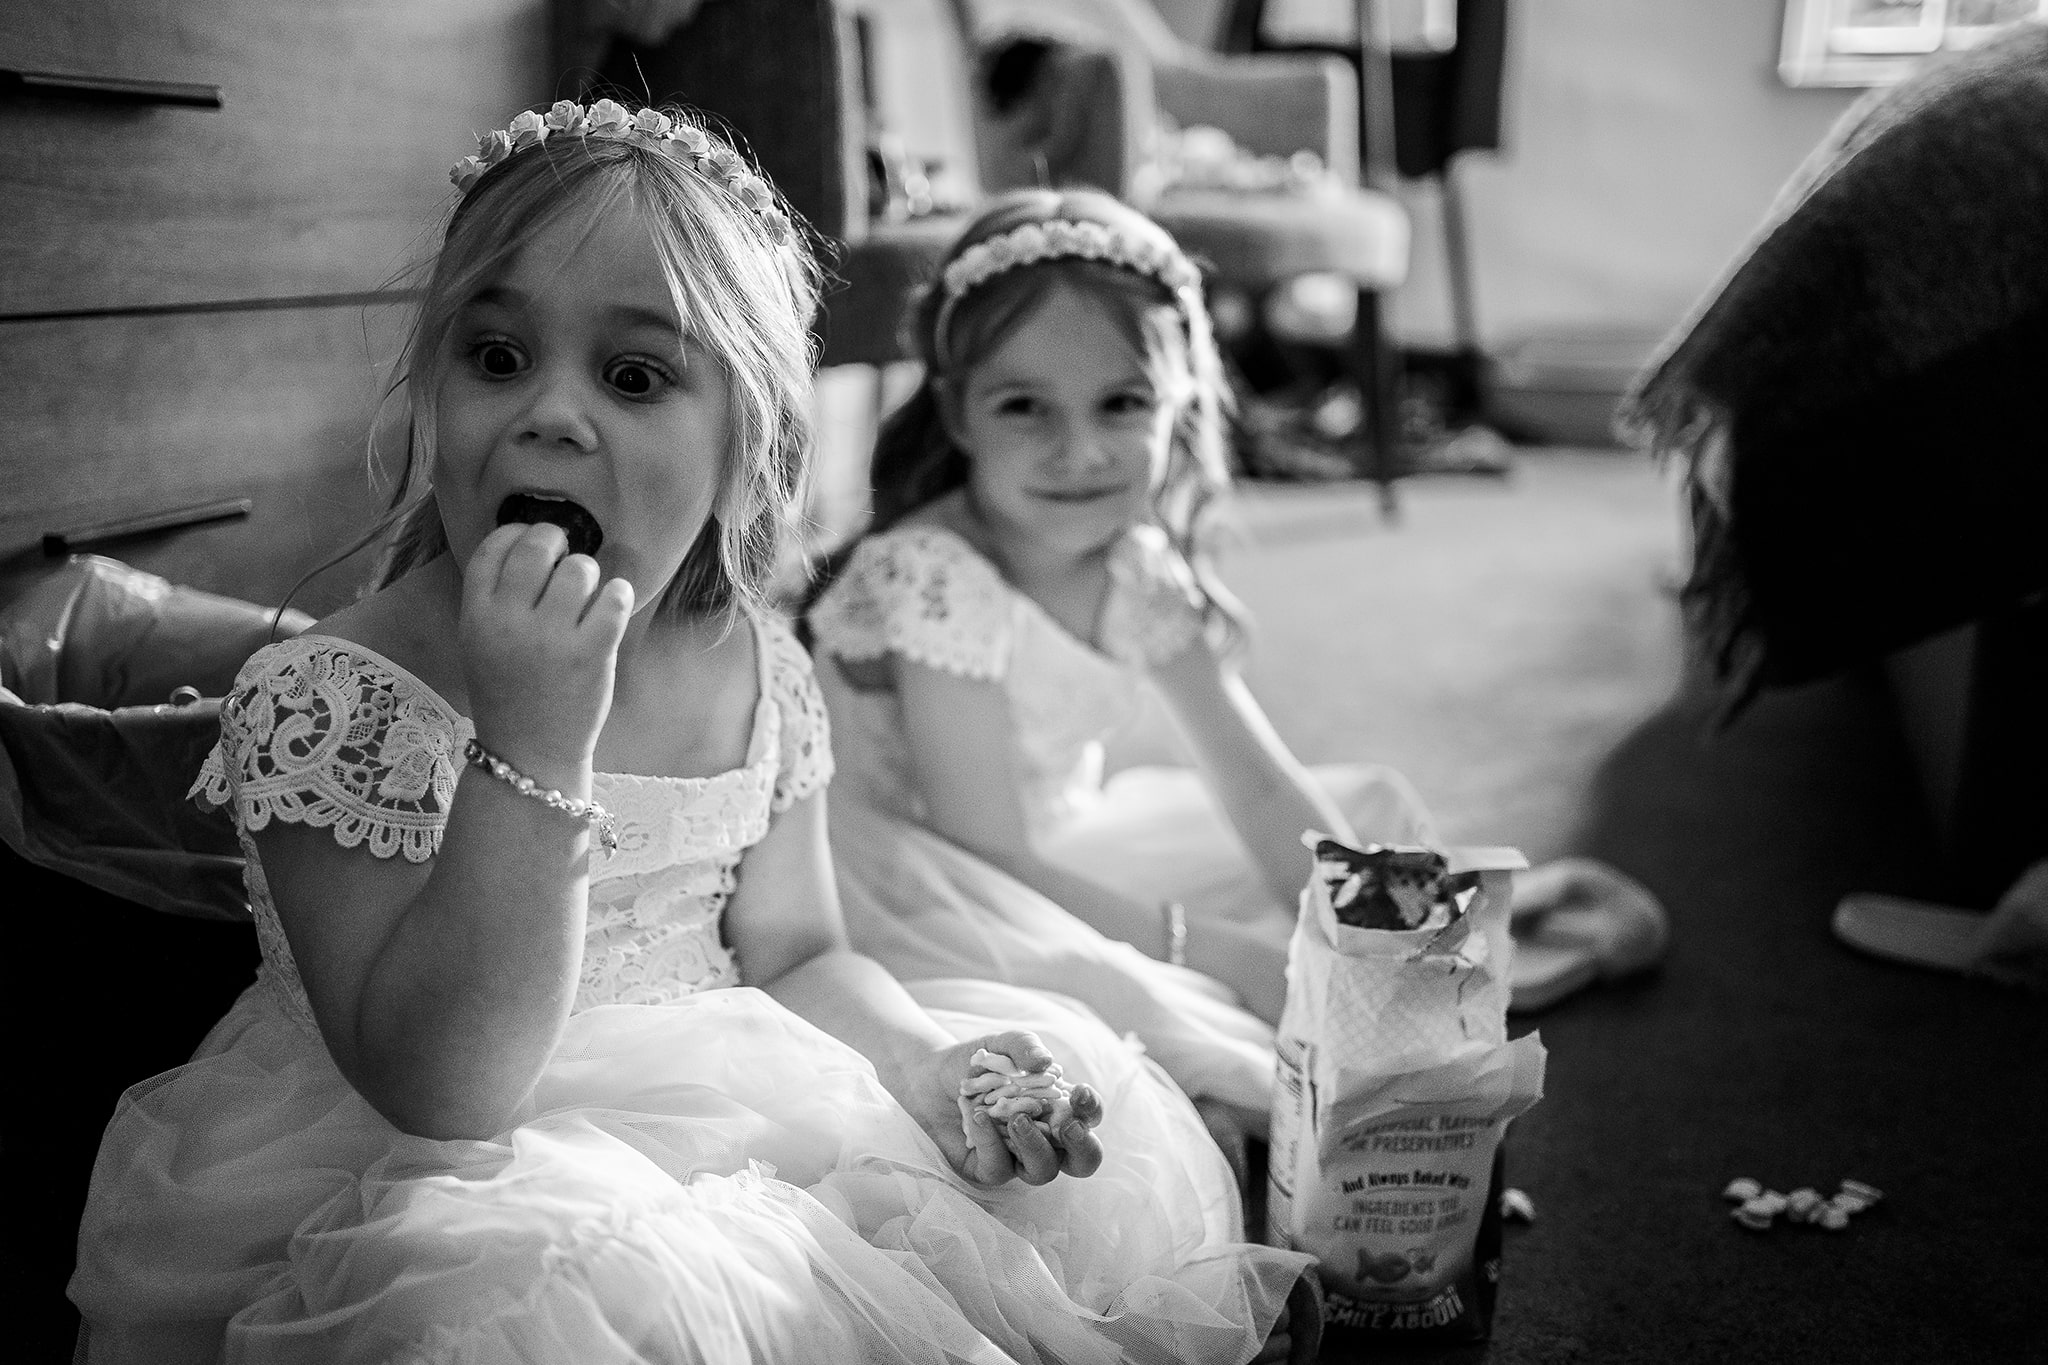 Great documentary style black and white photo taken by professional wedding photographer Emma Seaney of a pair of cute little girl bridesmaids sitting on the floor cheekily stuffing their faces with mini fish-shaped cheesy crackers